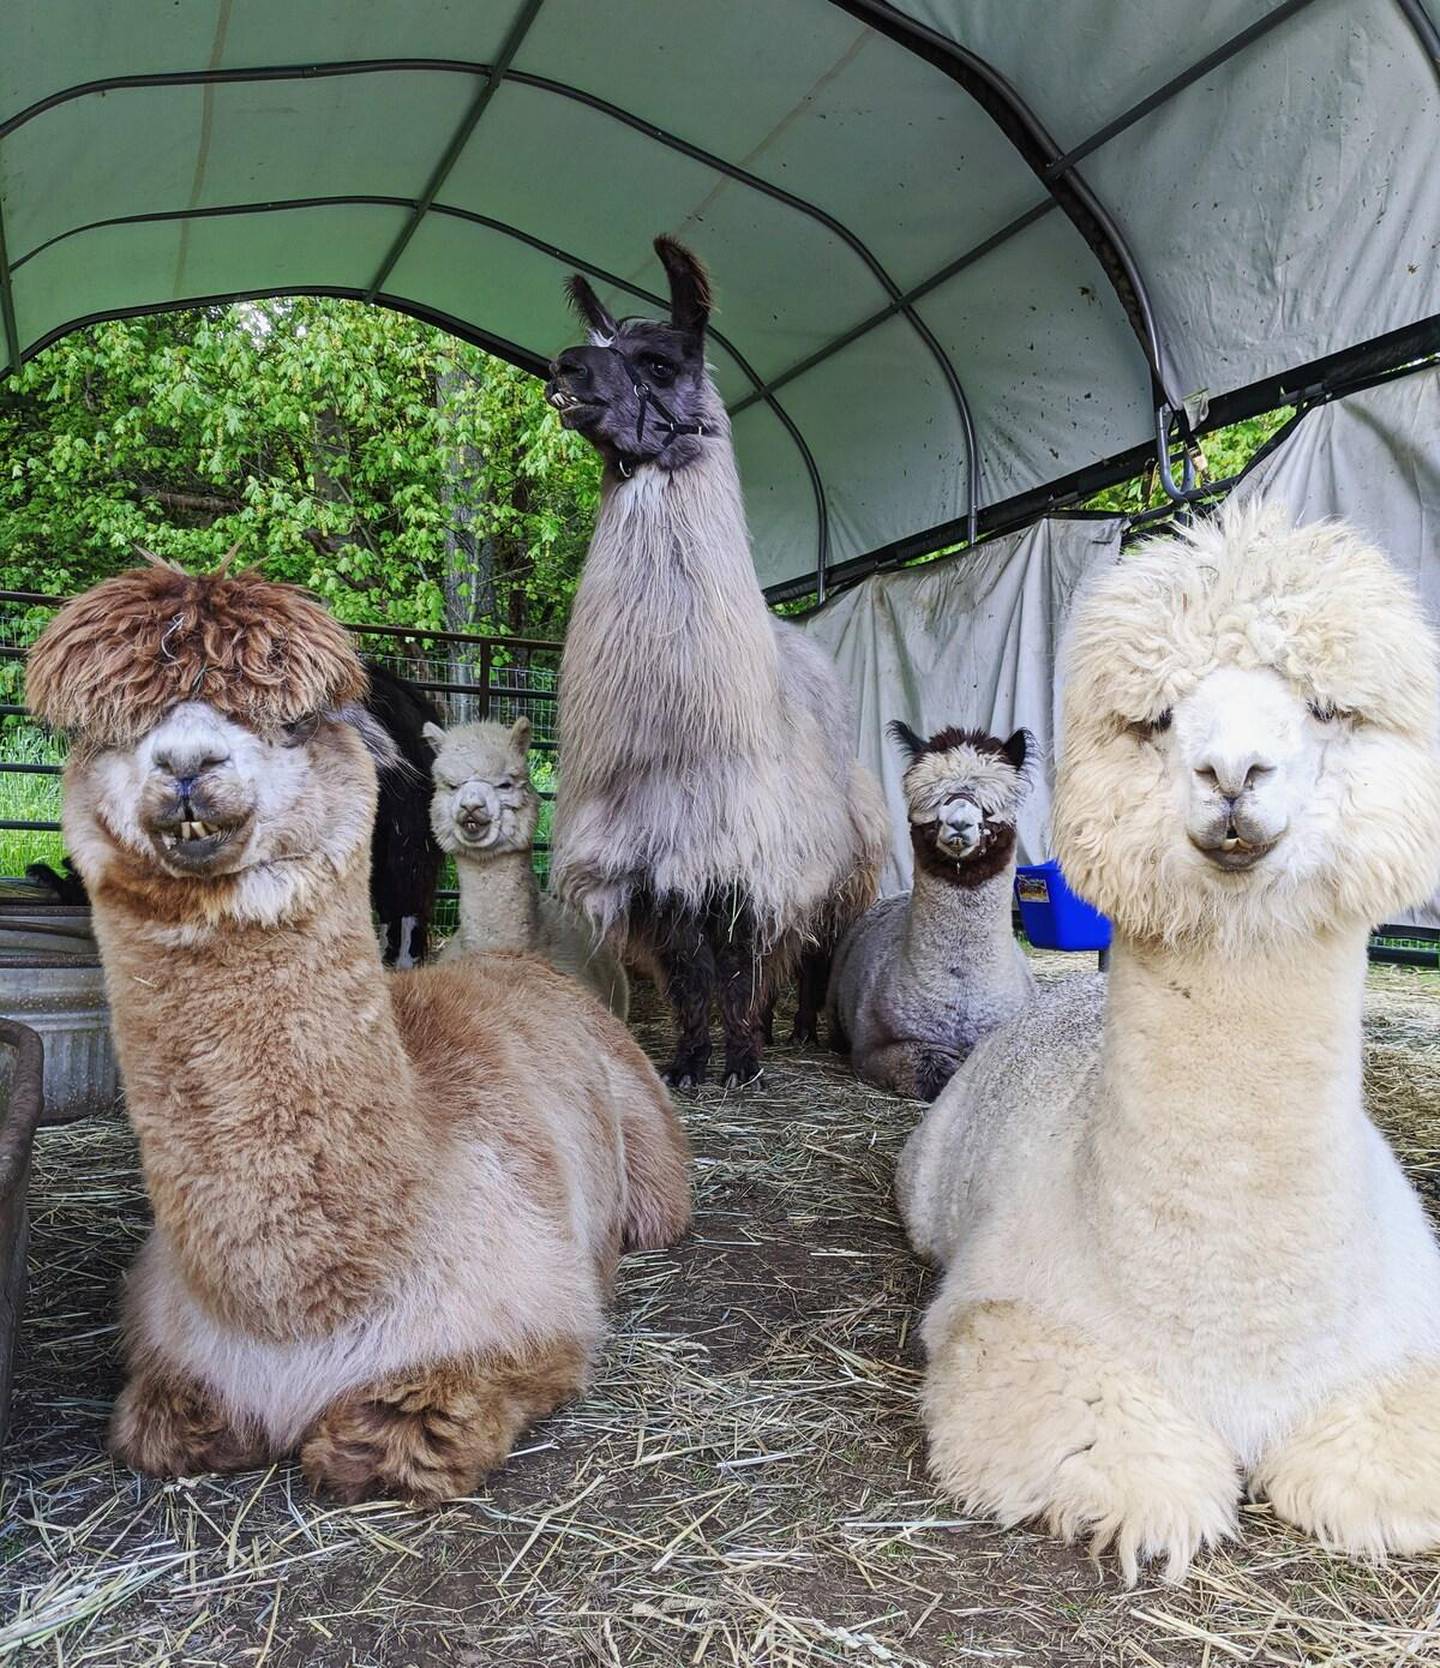 Meet therapy llamas living in Portland. Courtesy Airbnb